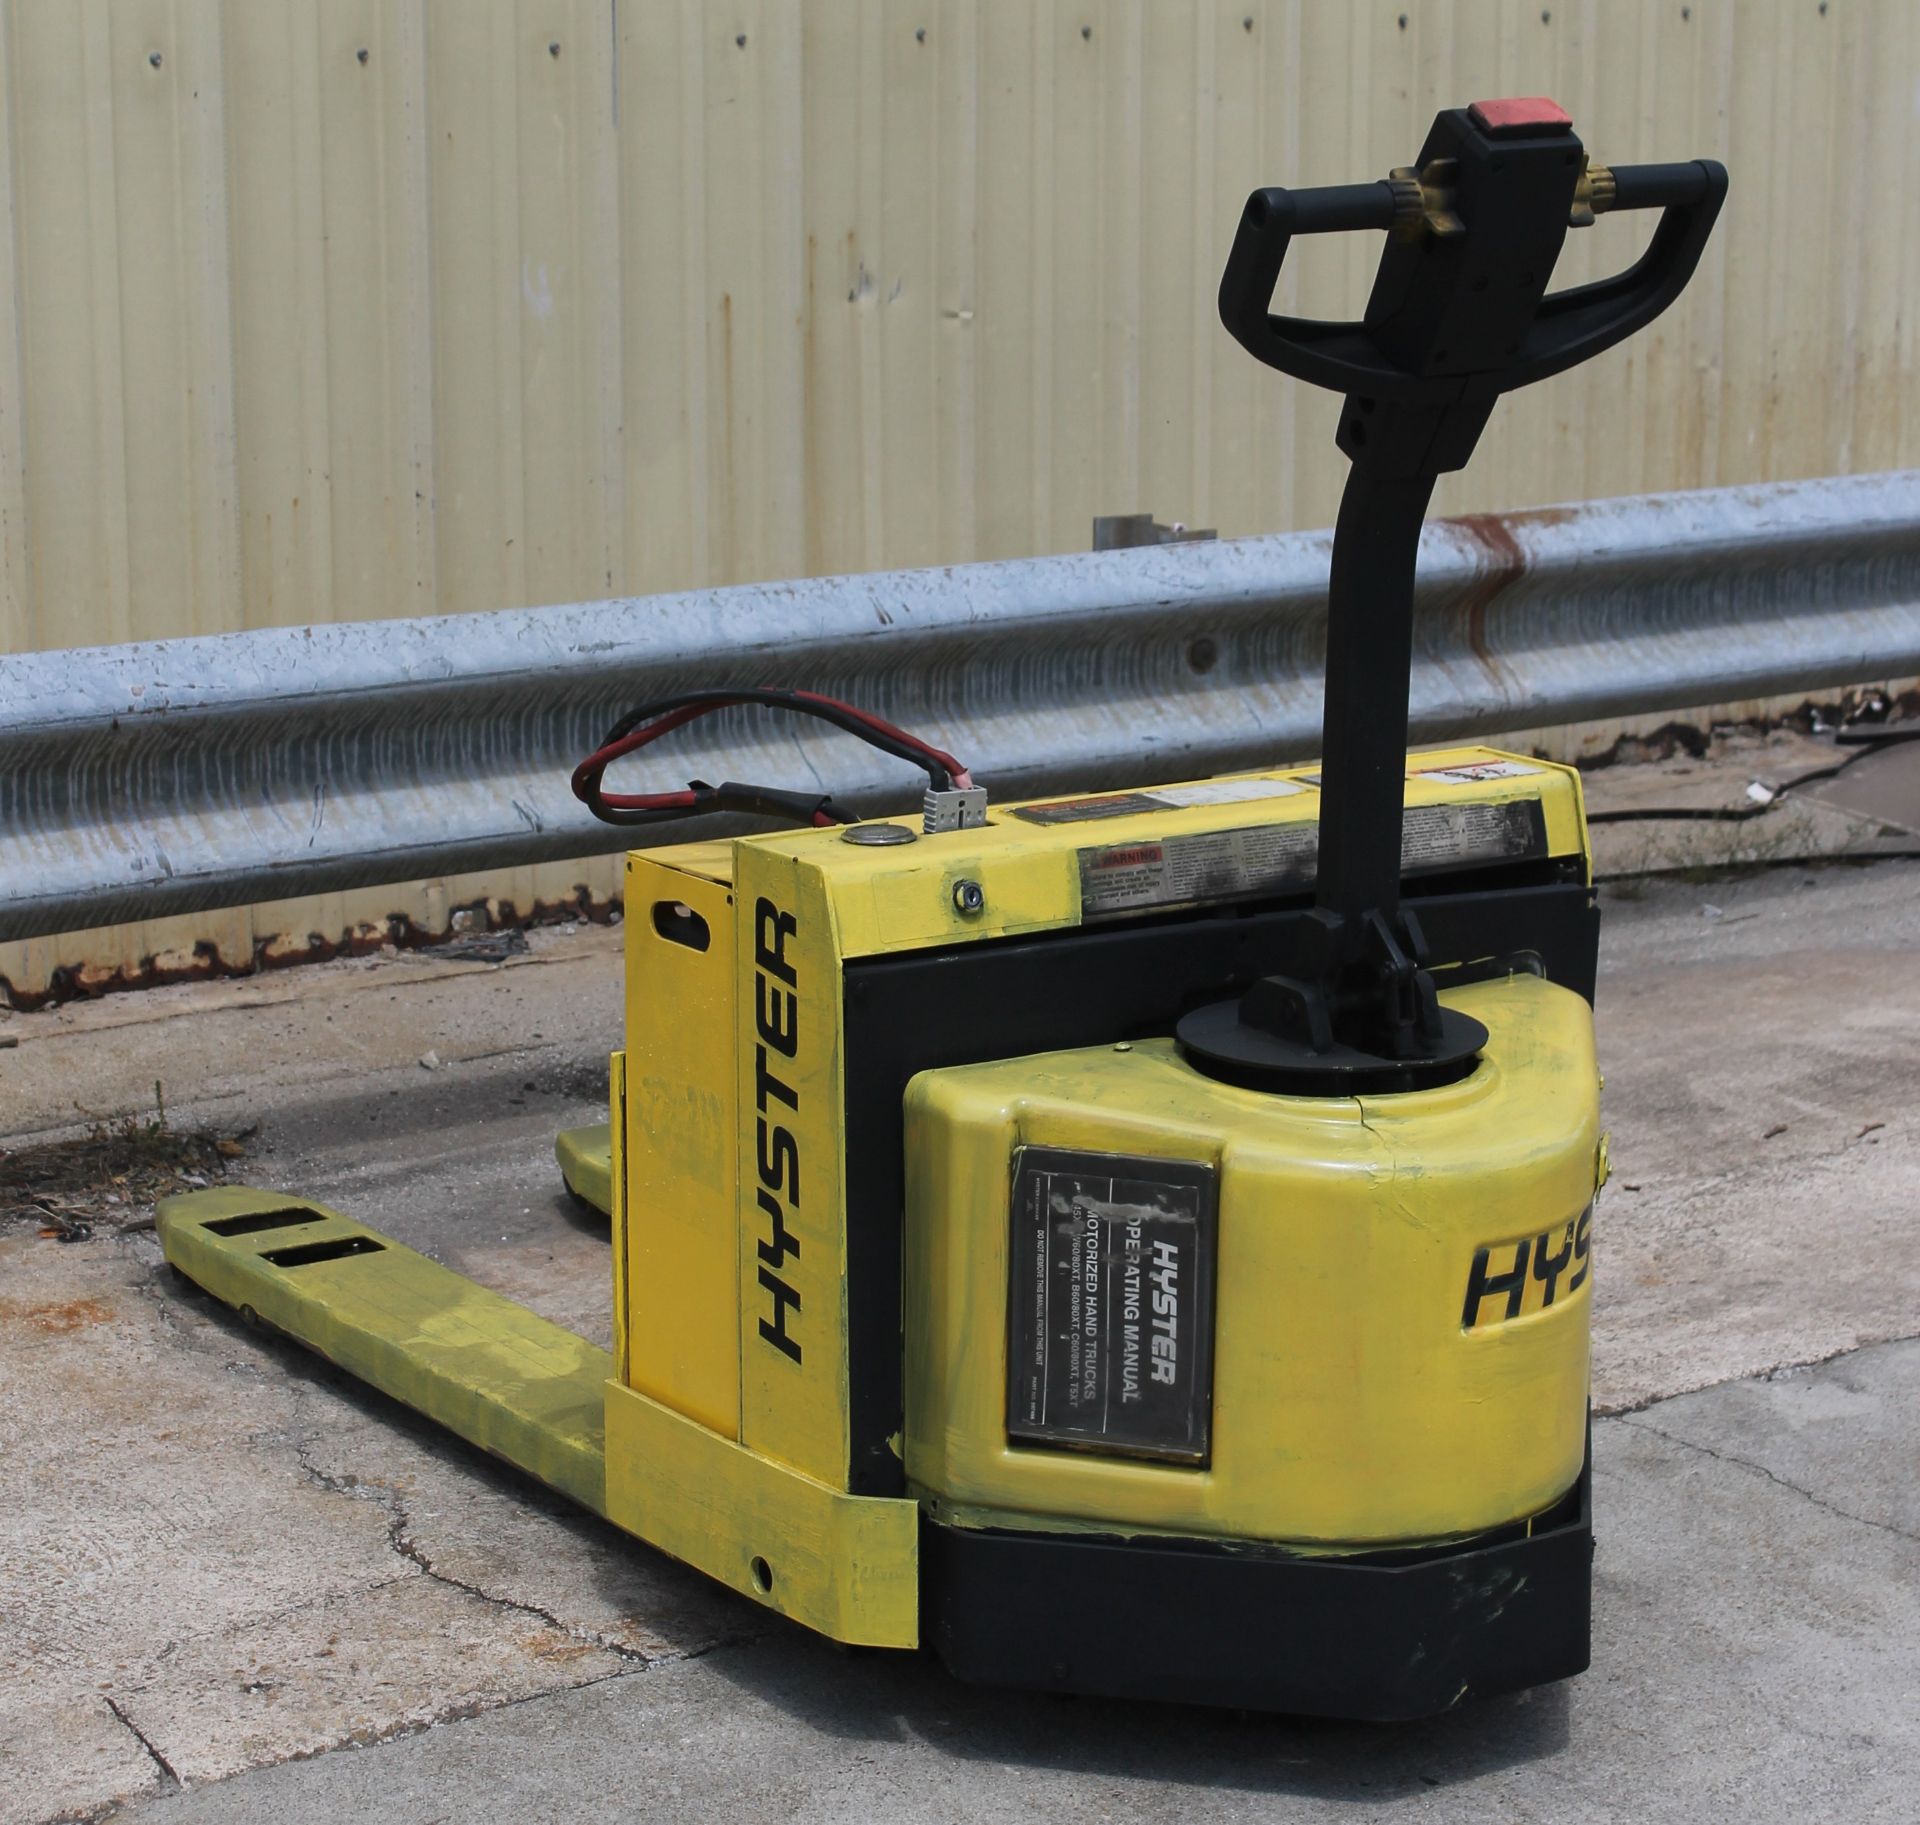 HYSTER 4500 LBS CAPACITY ELECTRIC PALLET JACK (CHECK VIDEO) - Image 6 of 6